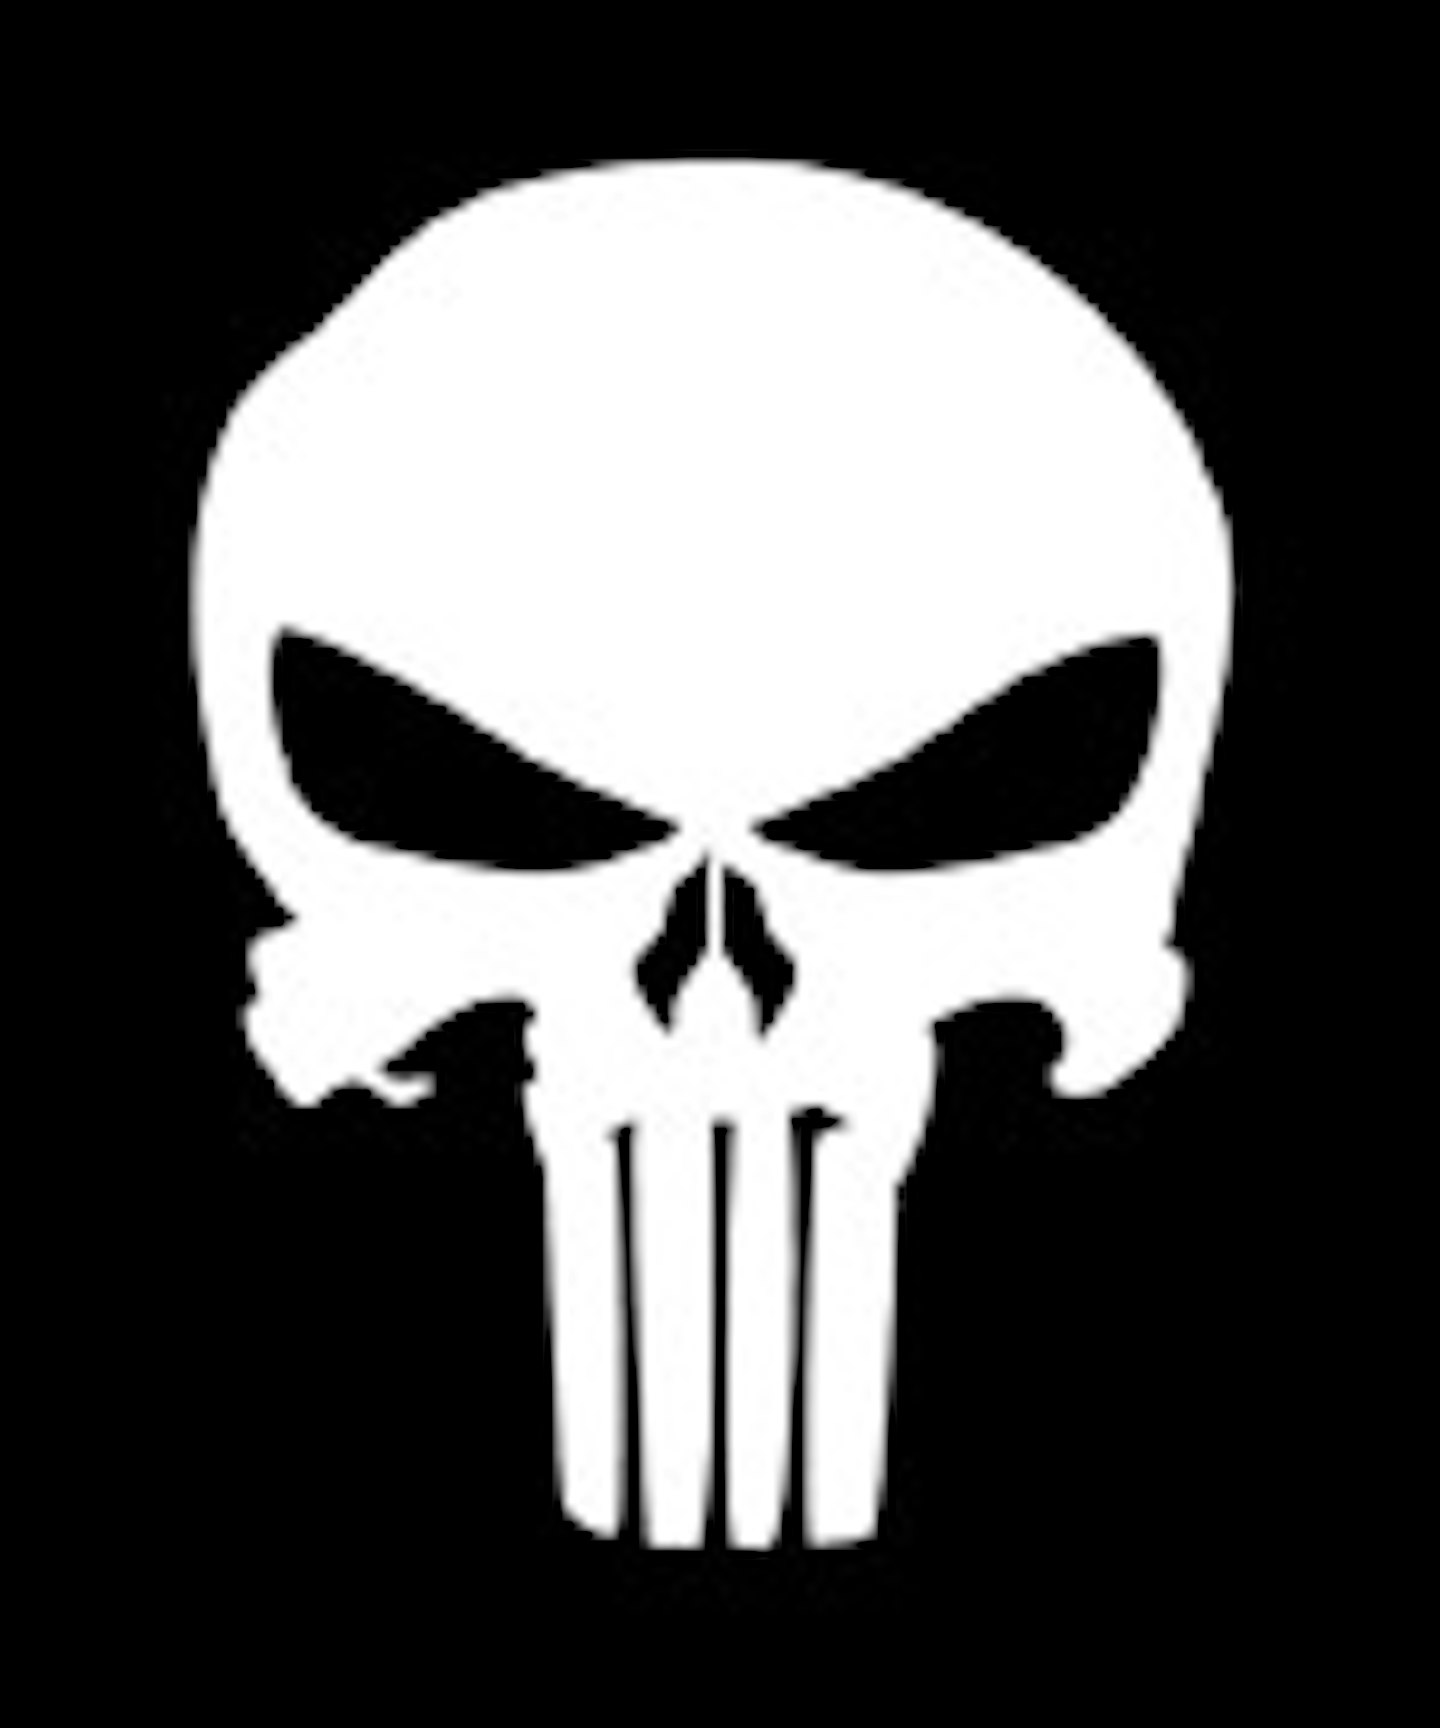 The Punisher Heading To Television